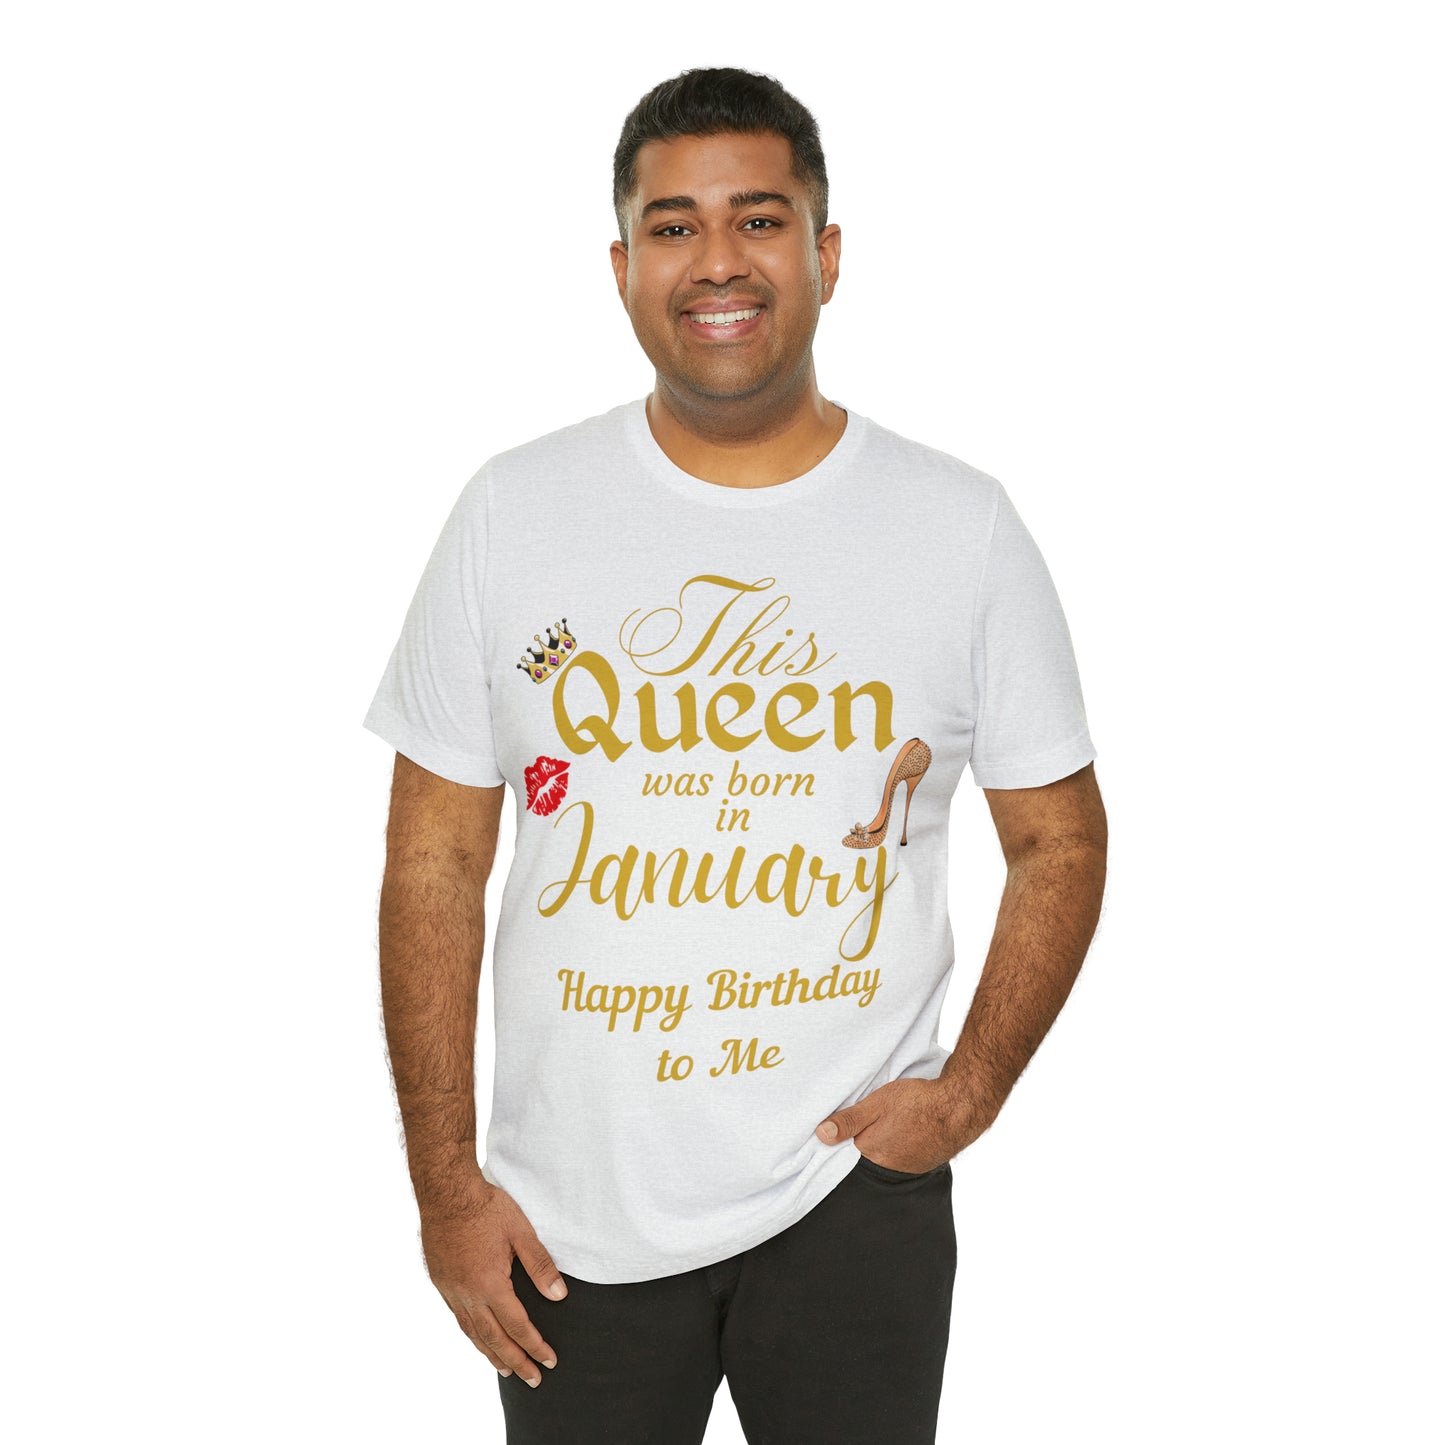 Birthday Queen Shirt, Gift for Birthday, This Queen was born in January Shirt, Funny Queen Shirt, Funny Birthday Shirt, Birthday Gift